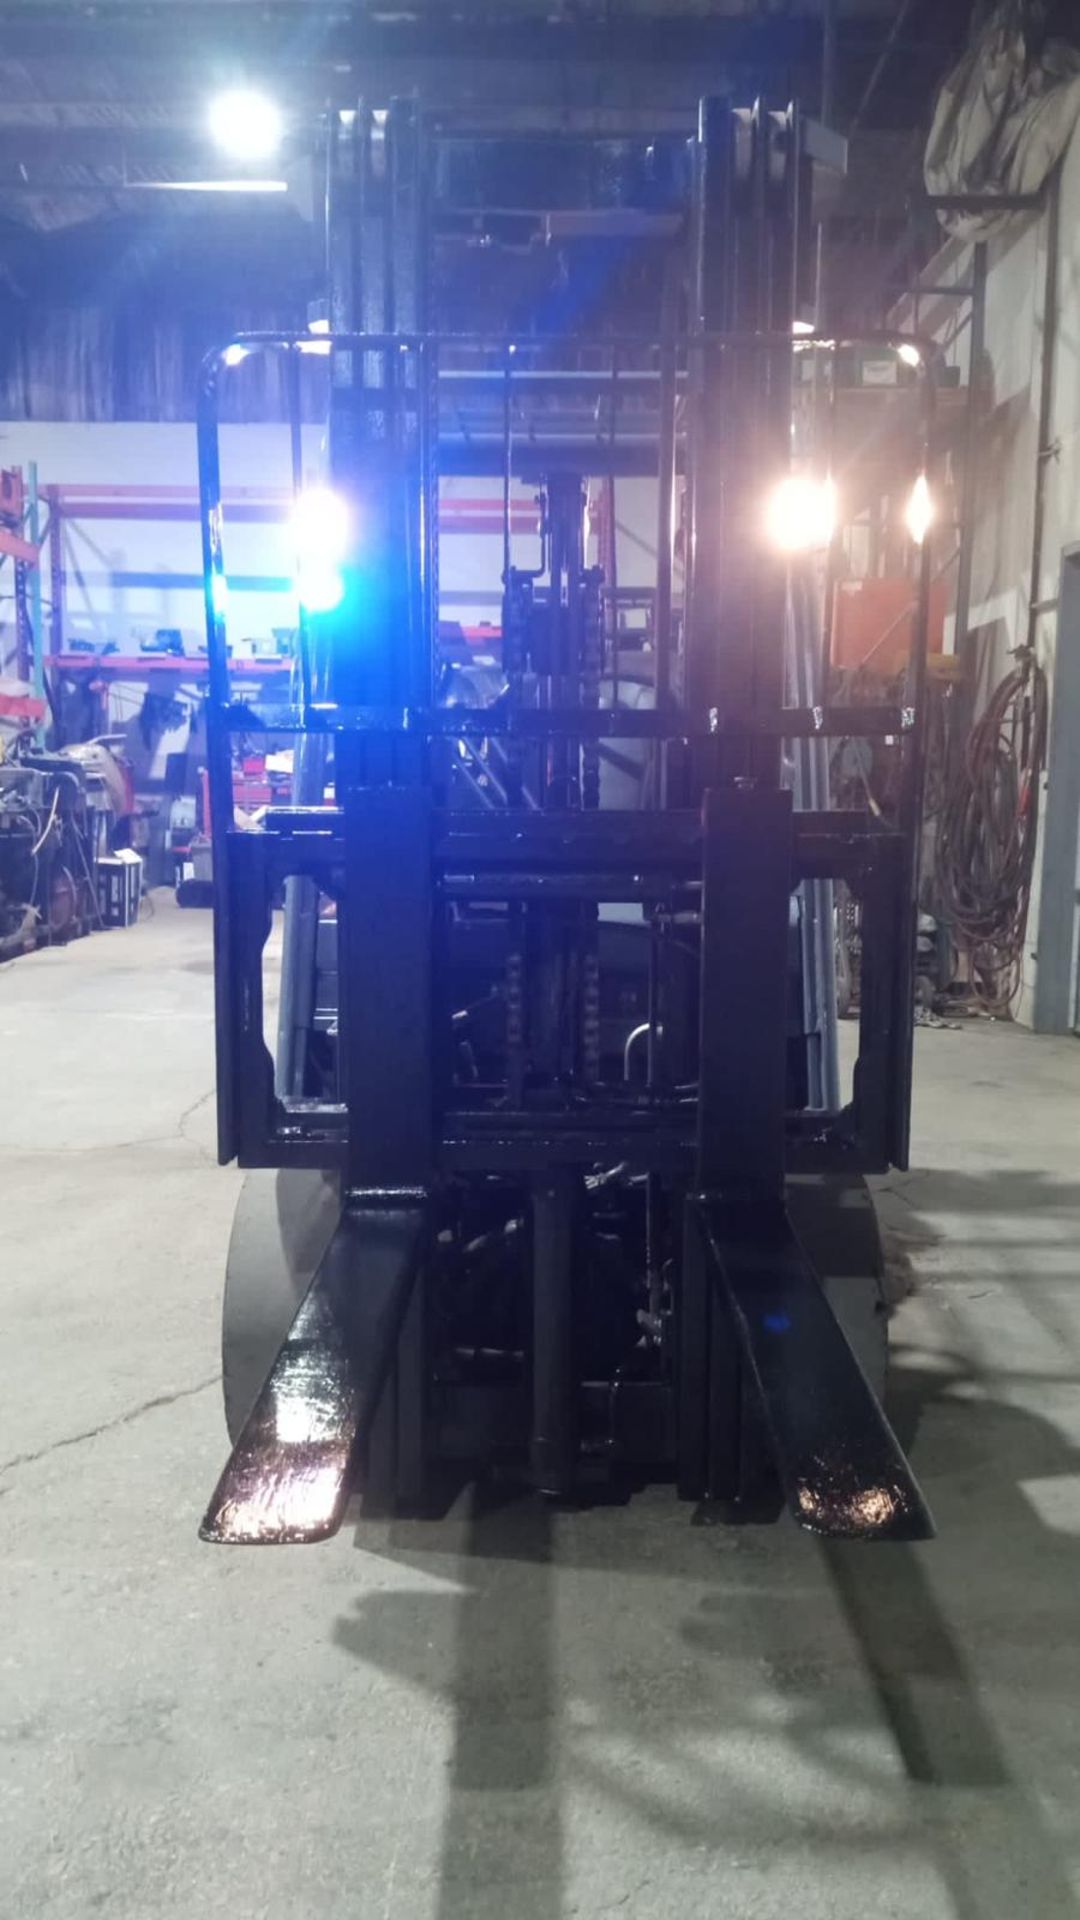 2018 TOYOTA 6,000lbs Capacity LPG (Propane) Forklift indoor with sideshift and 3-STAGE MAST - Image 3 of 3